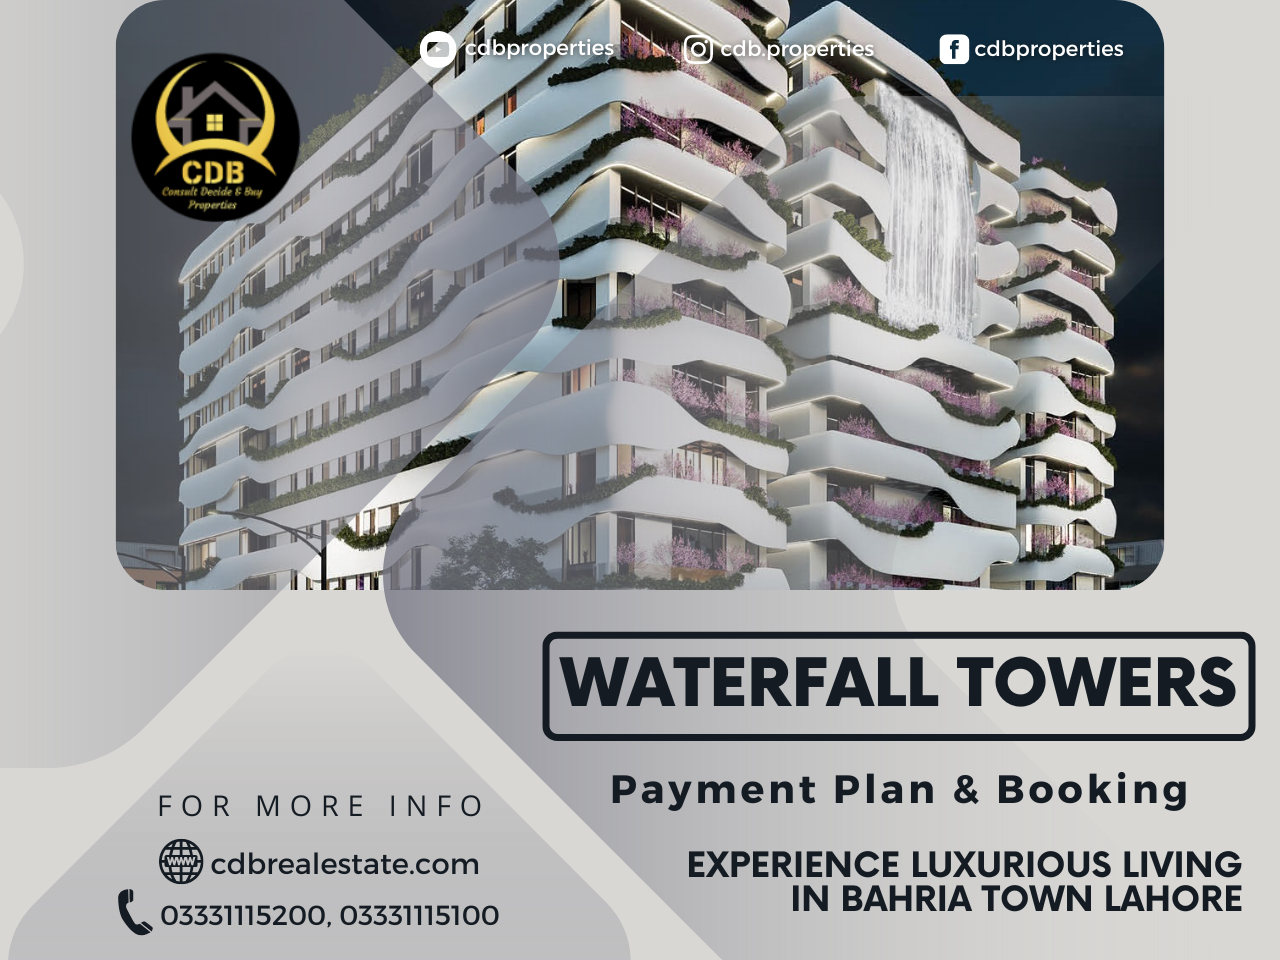 Waterfall Towers Bahria Town Lahore - Payment Plan & Booking